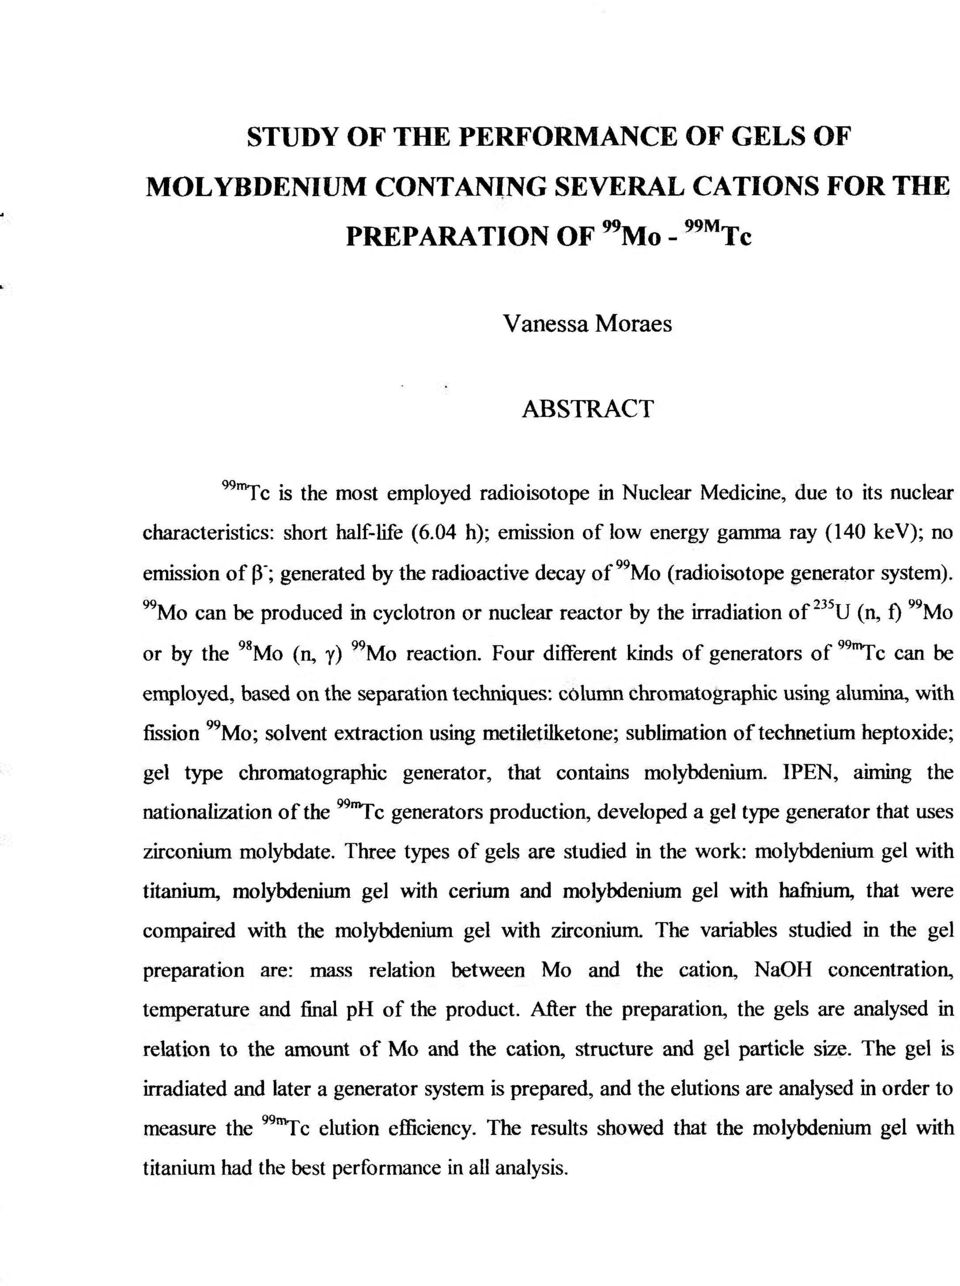 "MO can be produced in cyclotron or nuclear reactor by the irradiation of ^^^U (n, f) "Mo or by the '^Mo (n, y) "MO reaction.